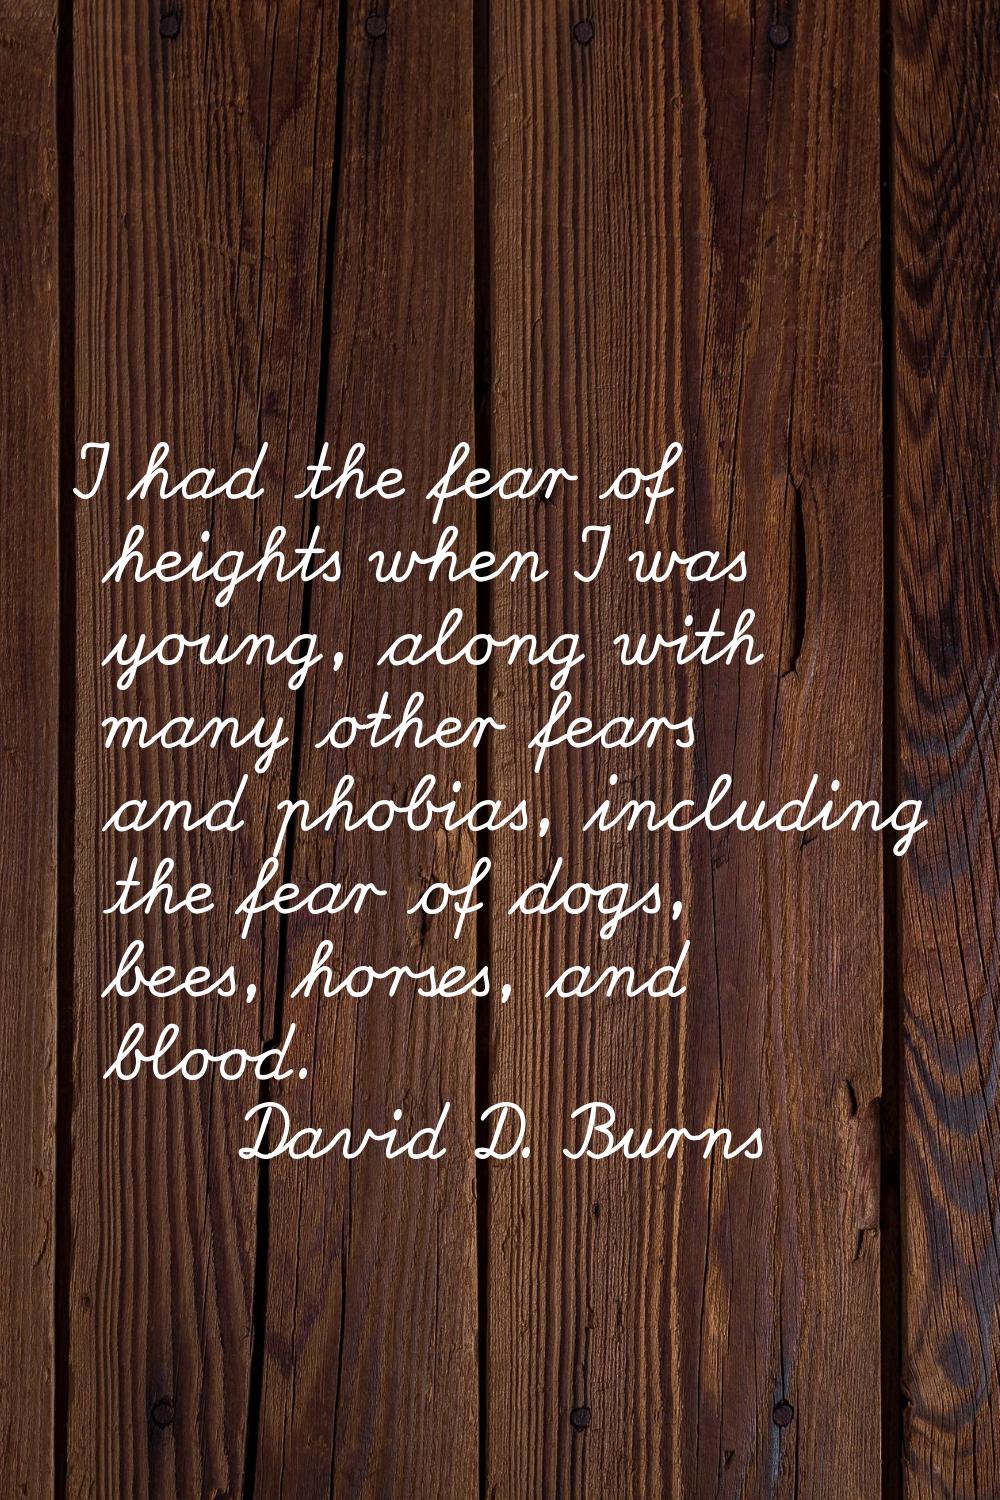 I had the fear of heights when I was young, along with many other fears and phobias, including the 